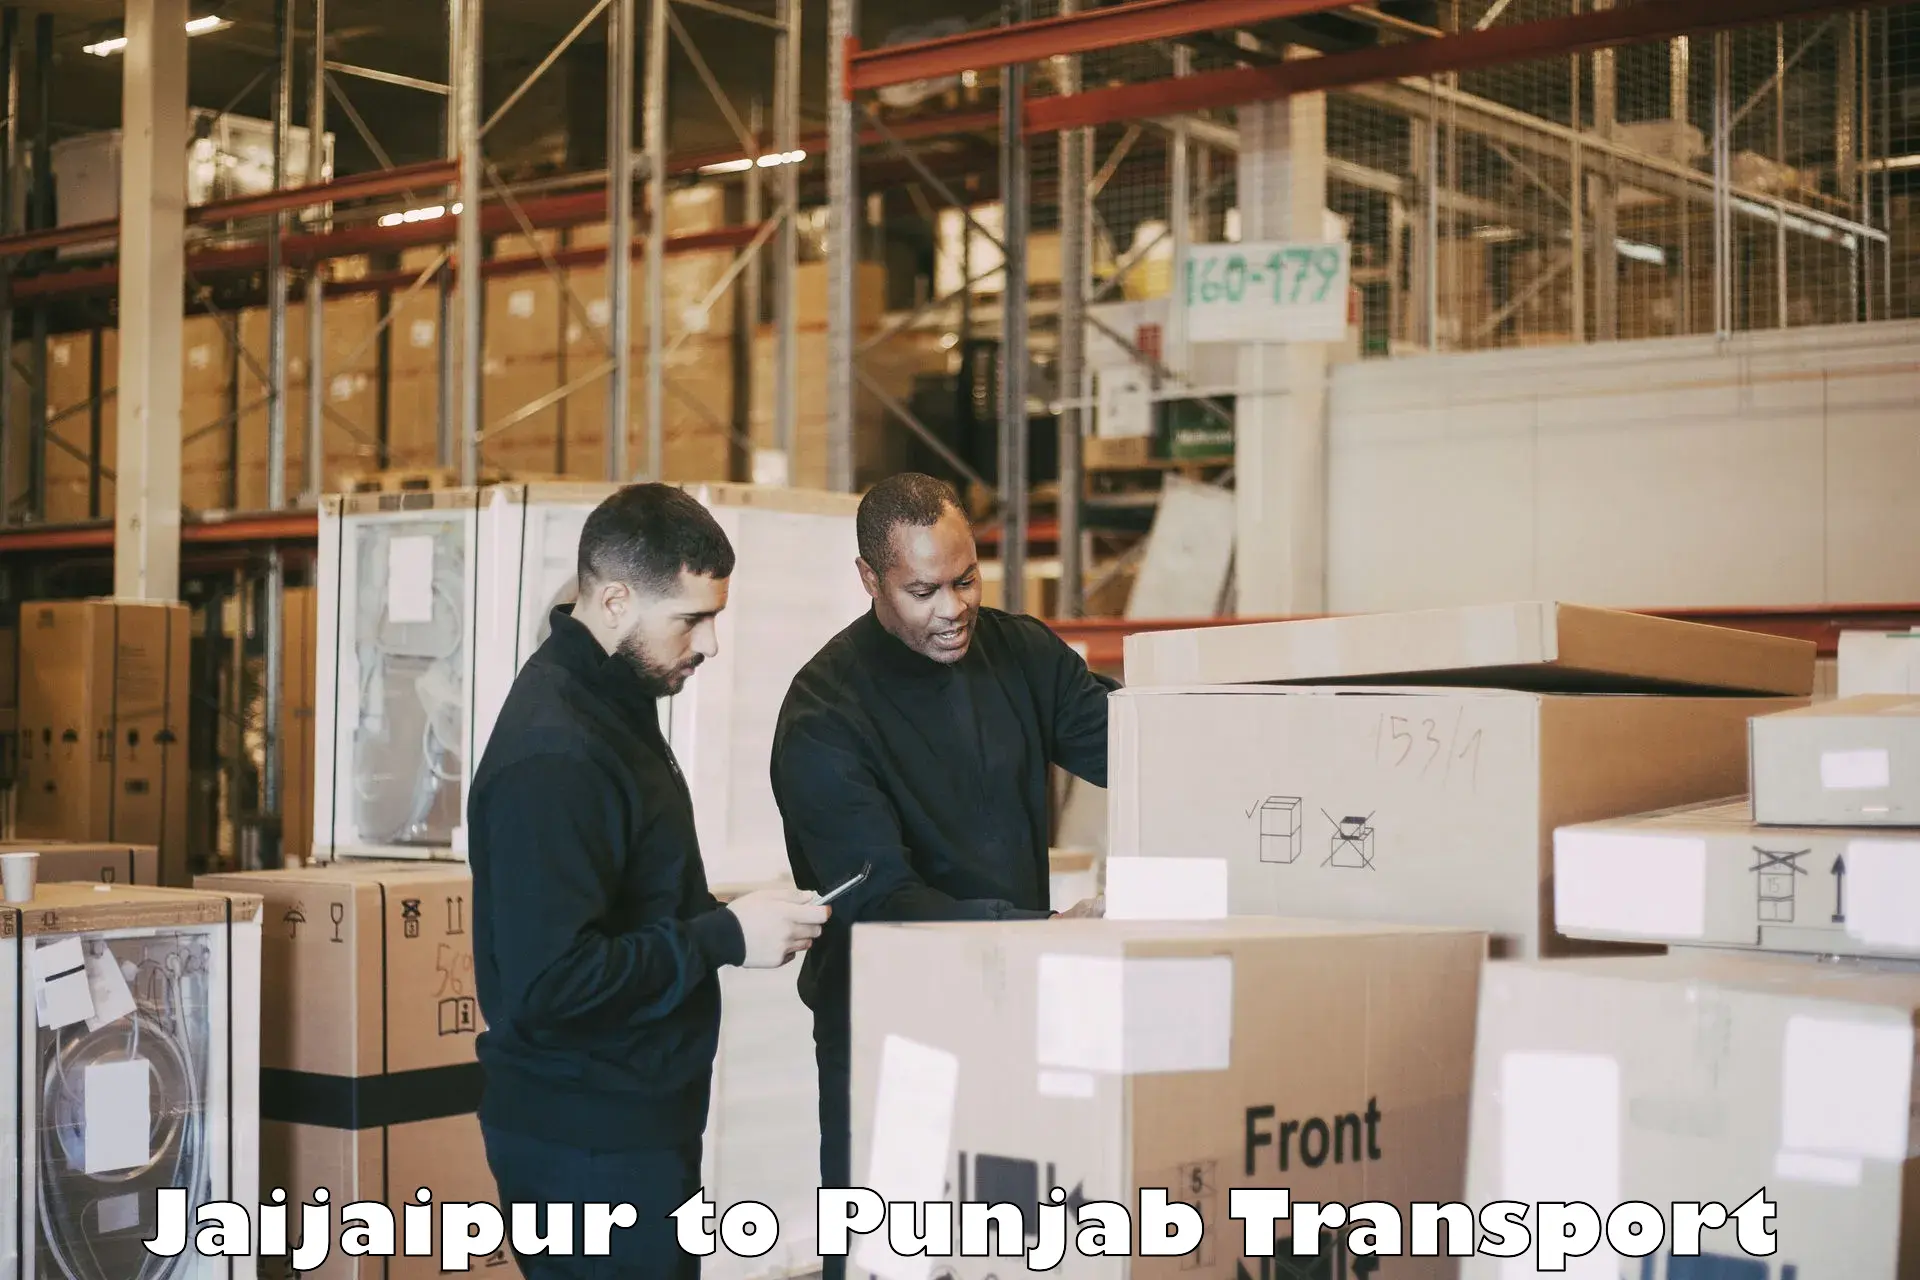 Domestic transport services Jaijaipur to Sultanpur Lodhi